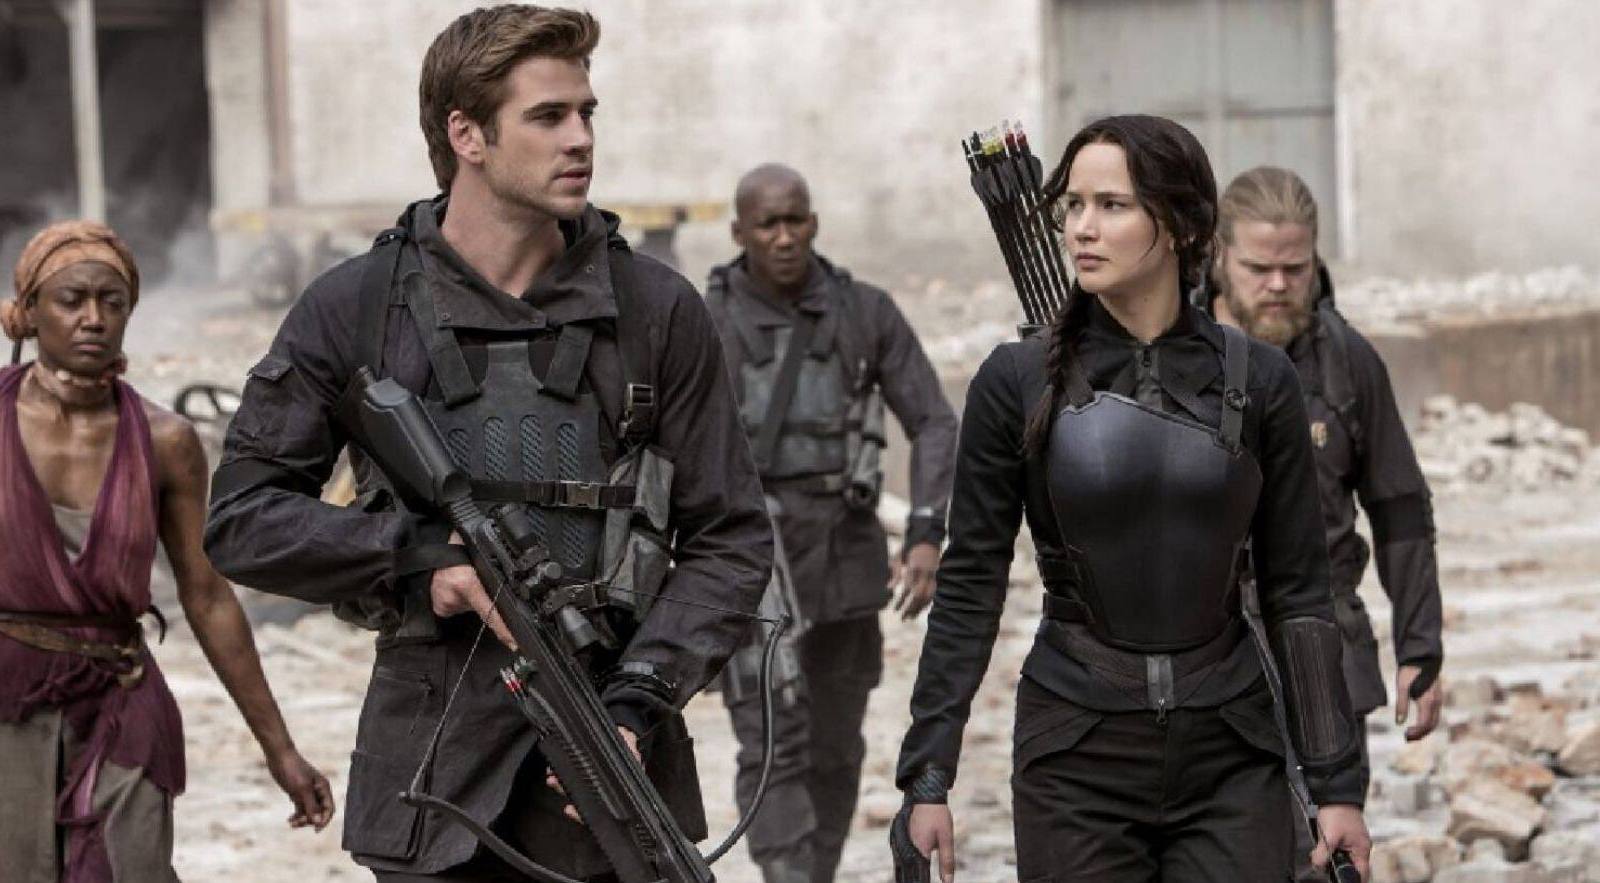 The Hunger Games: Mockingjay, the director 'regrets' having divided the film into two parts